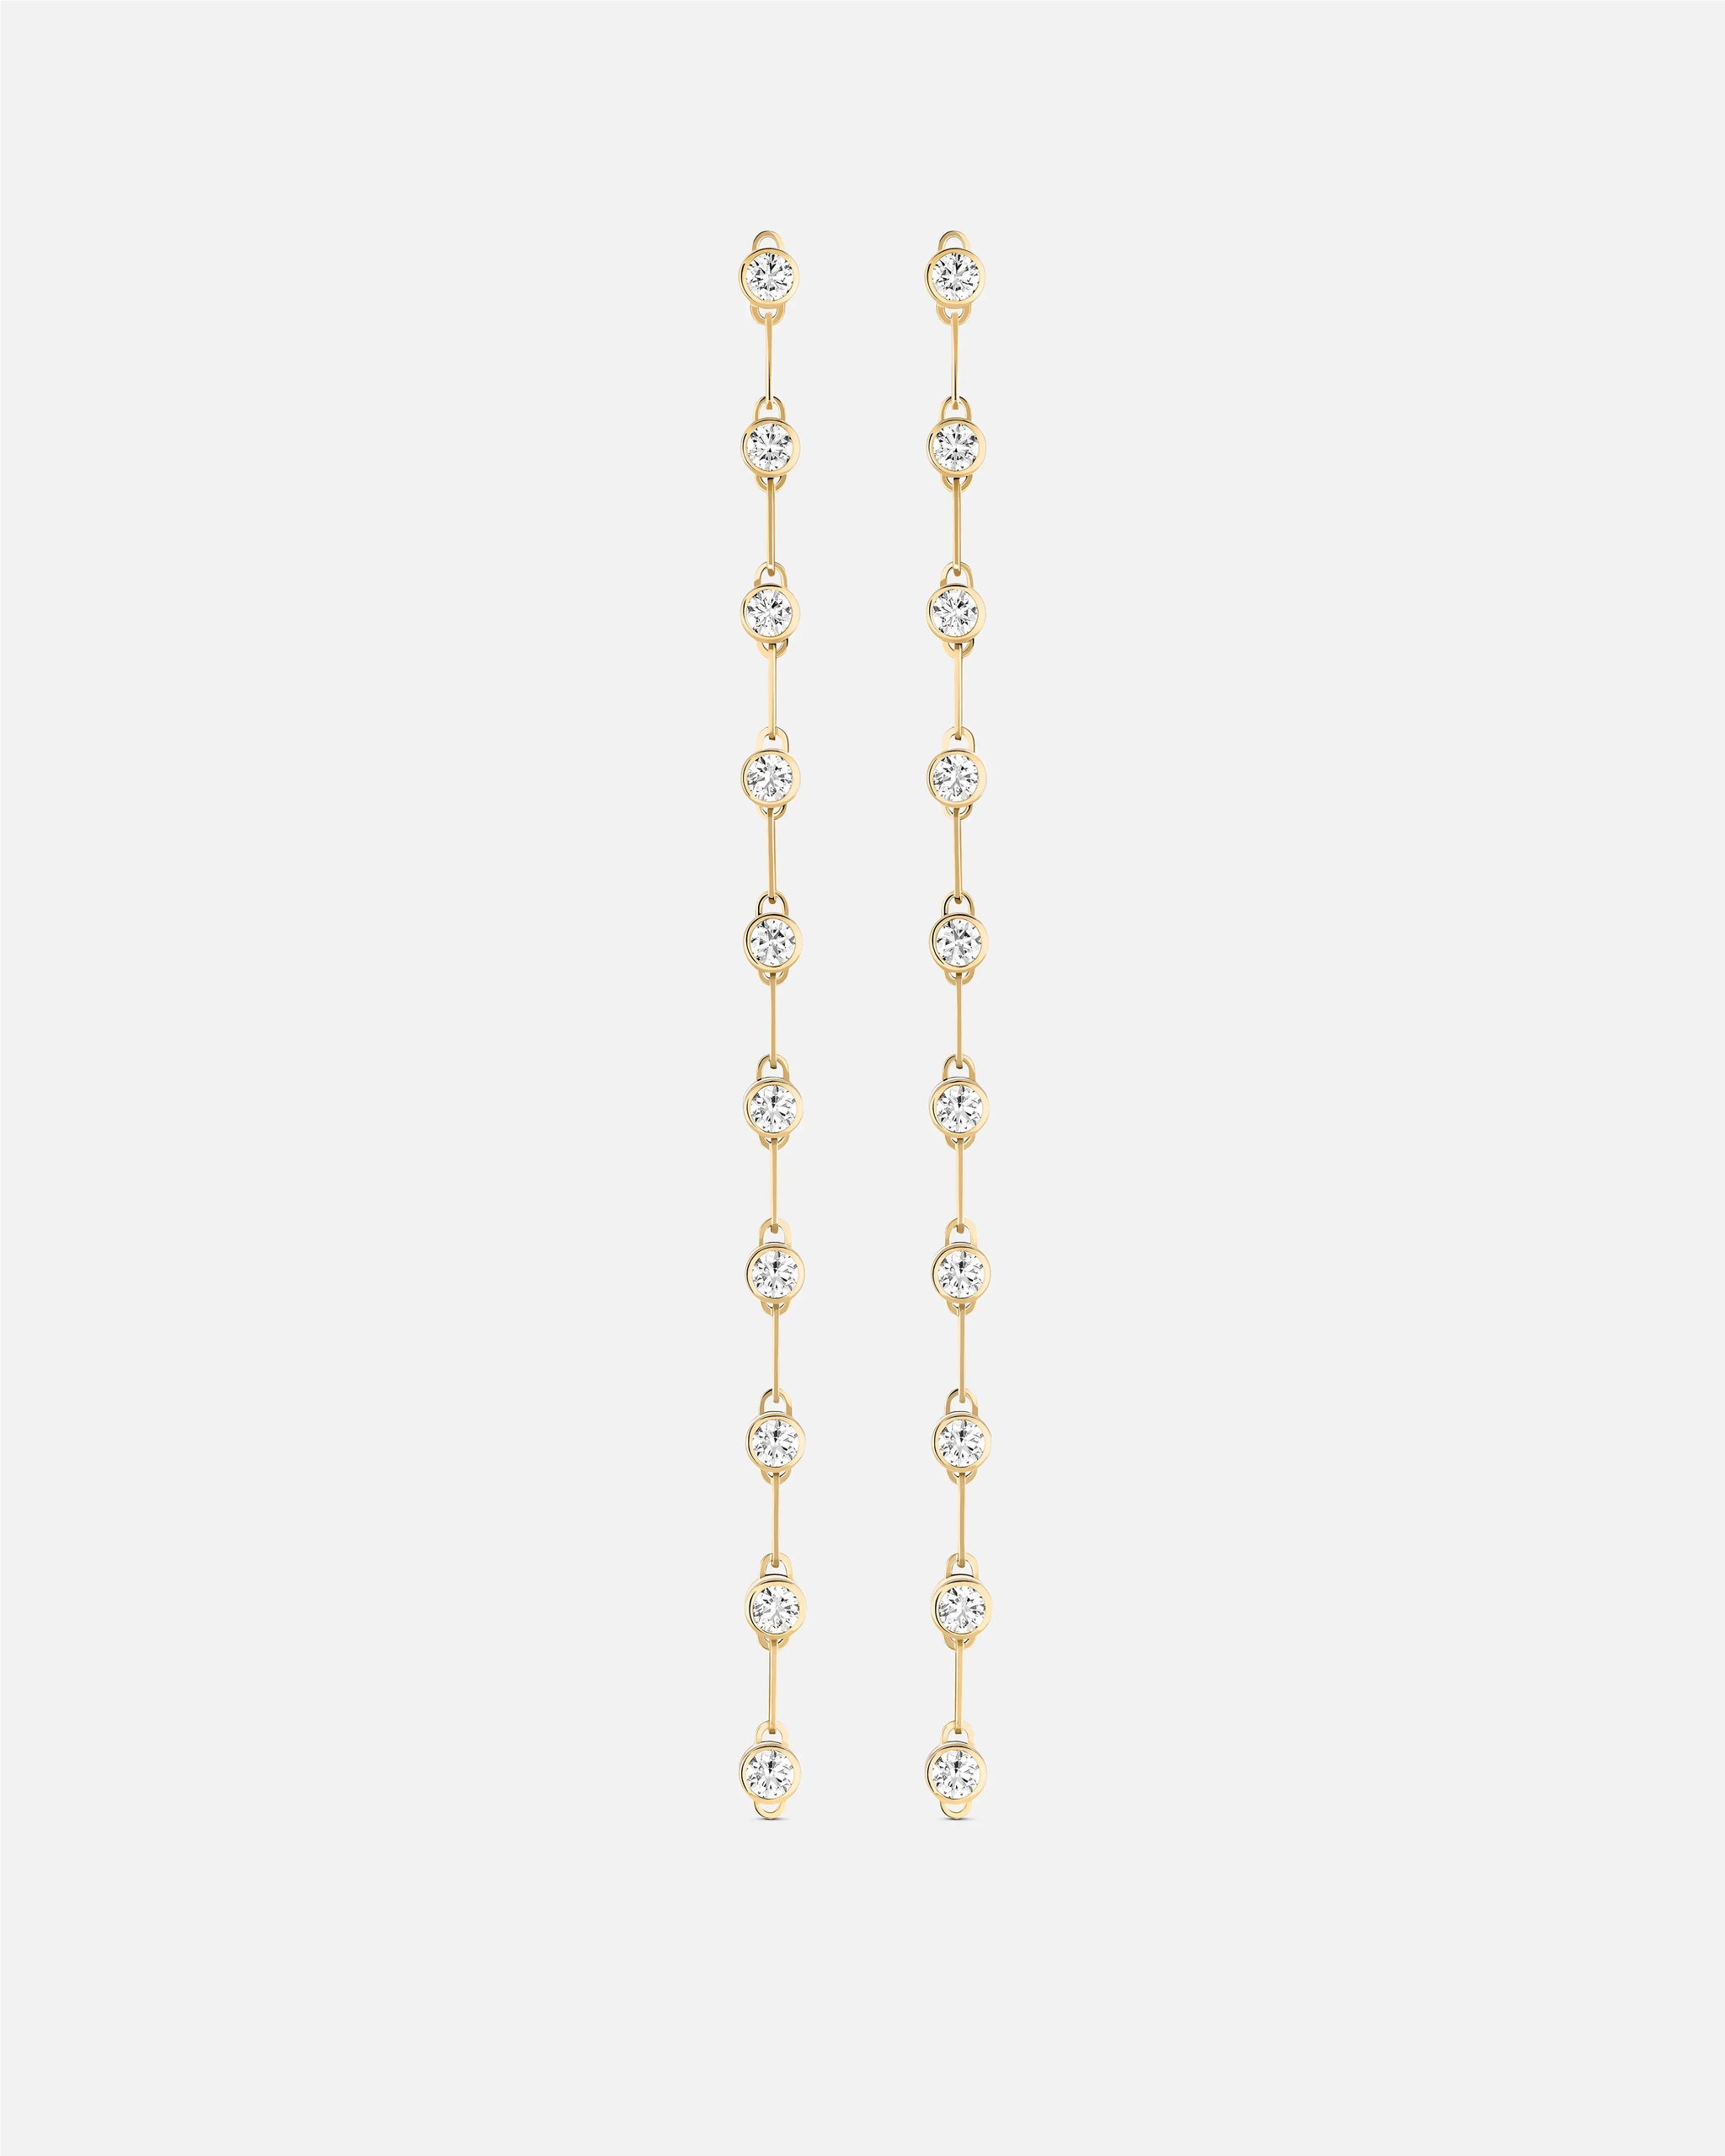 Gala GM Classics Earrings in Yellow Gold - 1 - Nouvel Heritage